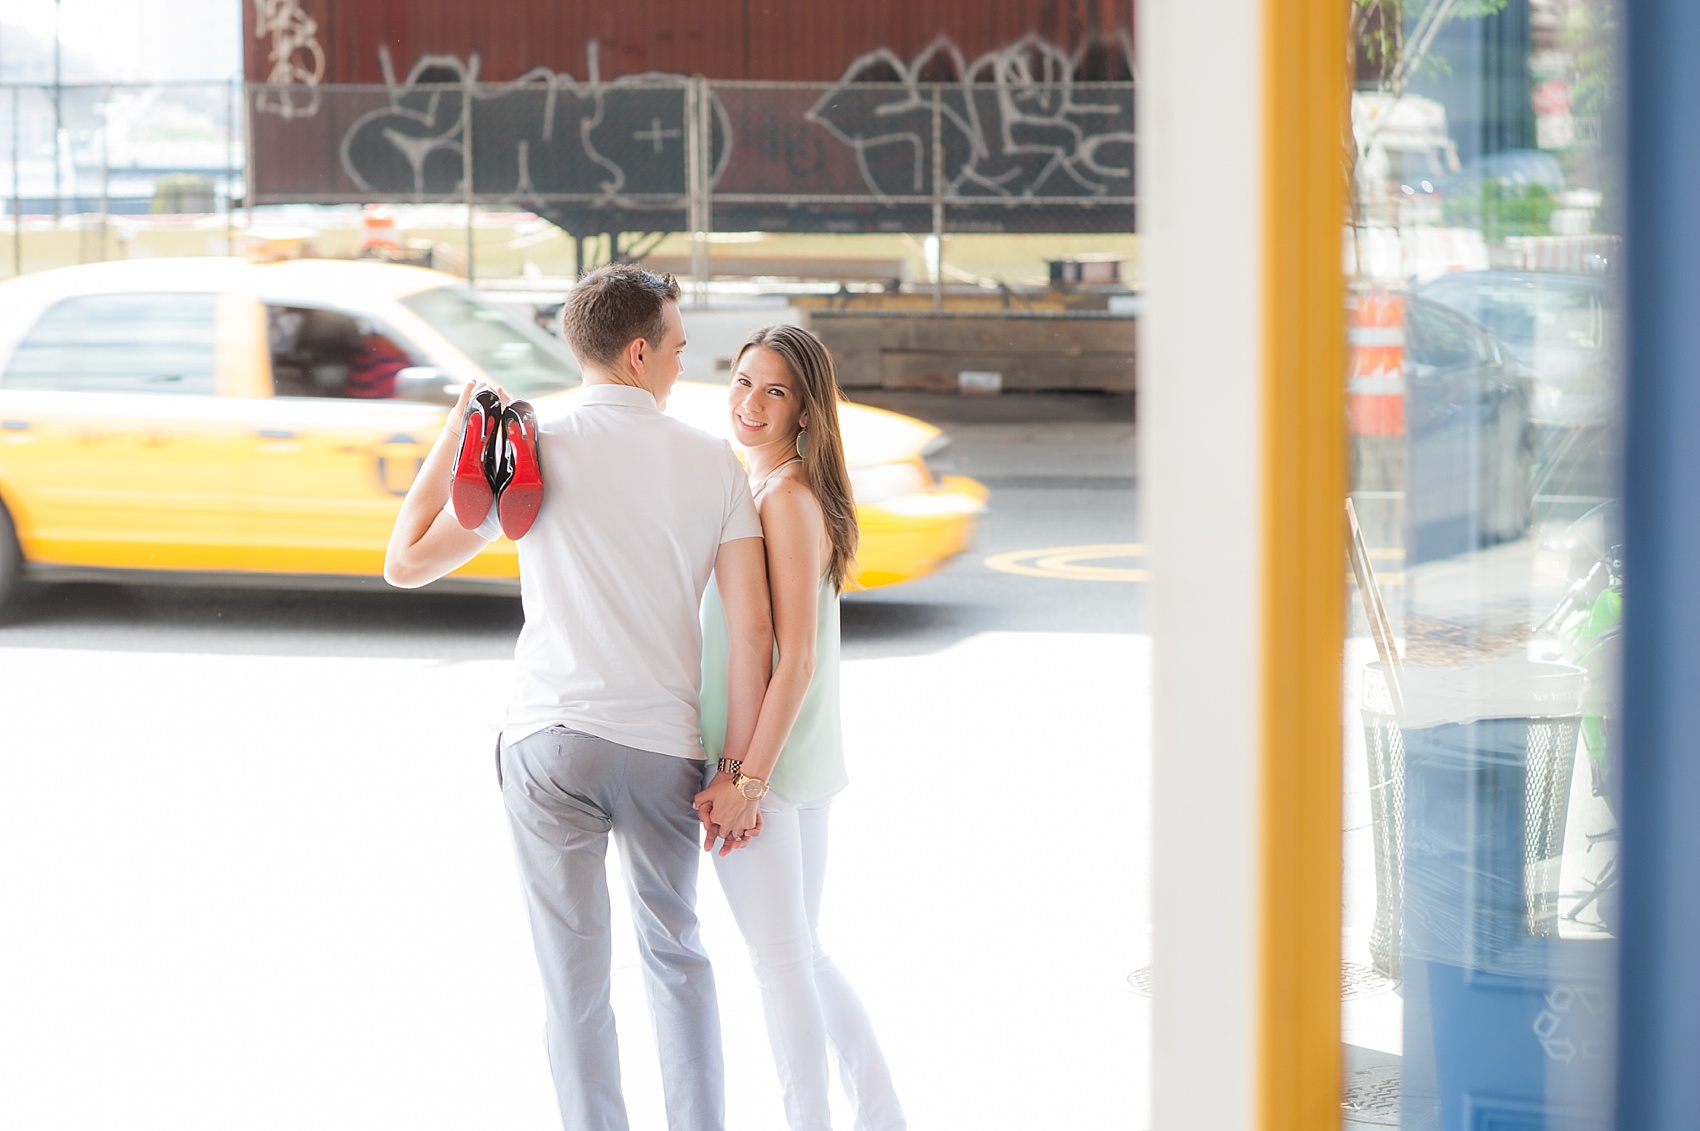 South Street Seaport engagement session in NYC. Photos by Mikkel Paige Photography. #nyc #southstreetseaport #louboutin